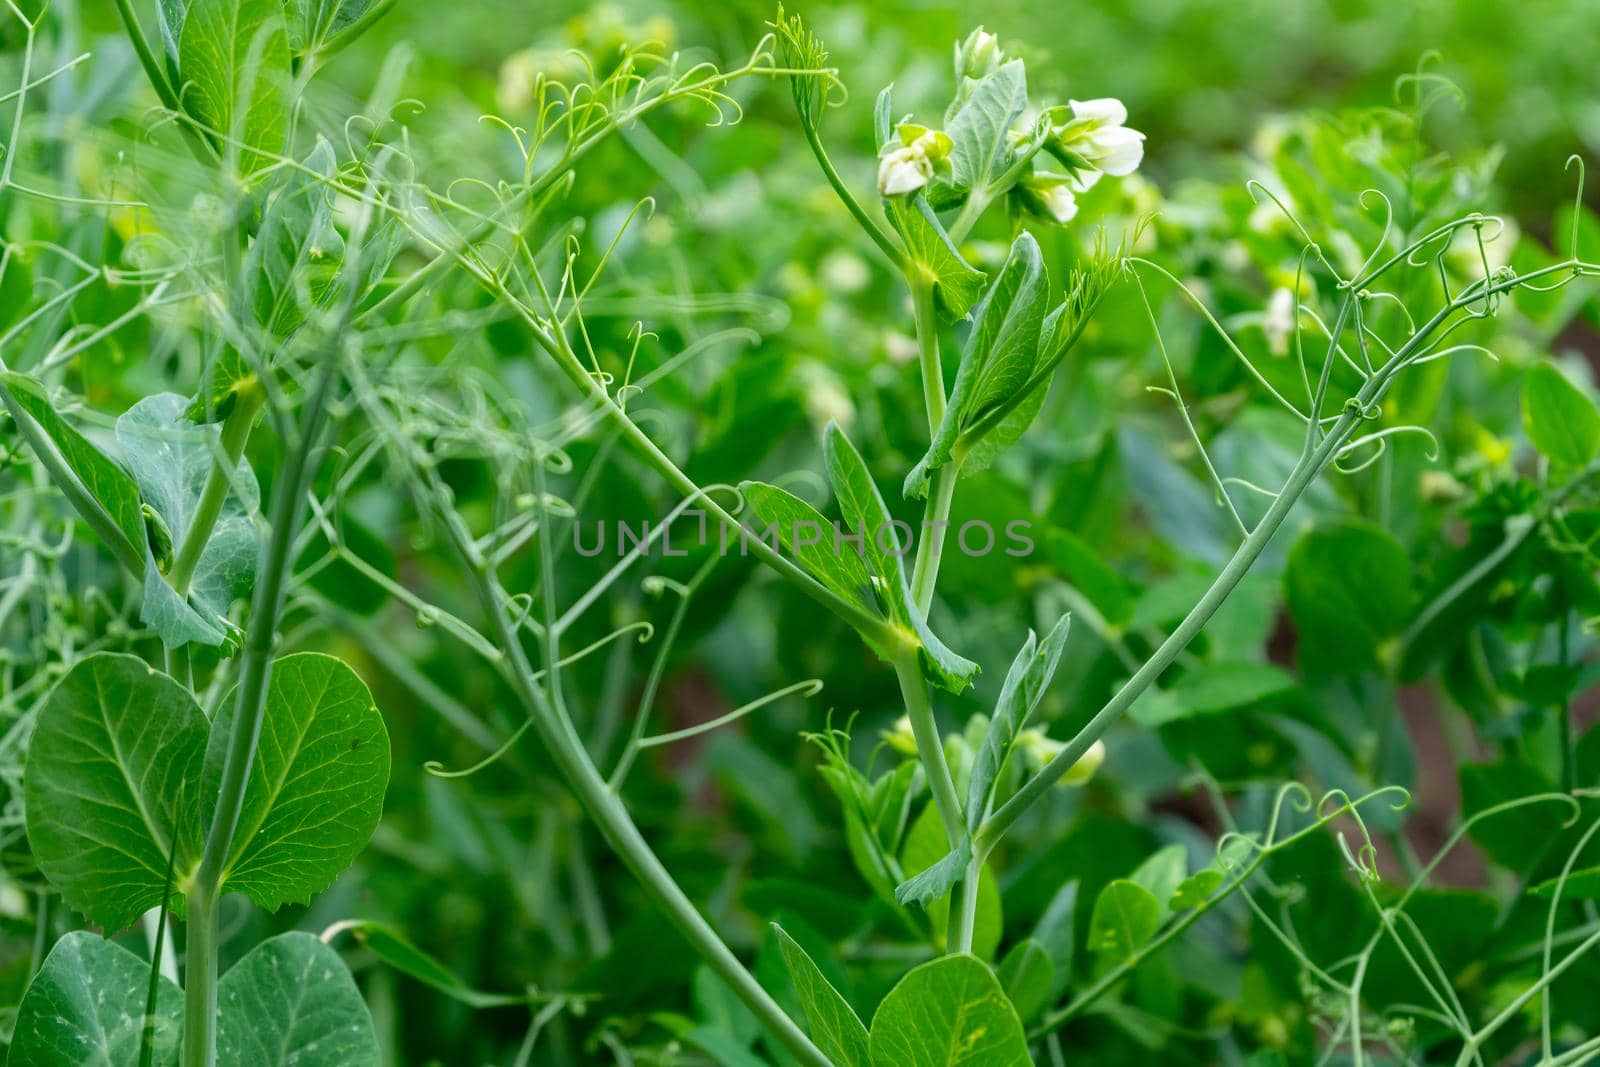 Close-up of sprouts and flowers of young peas. Selective focus.